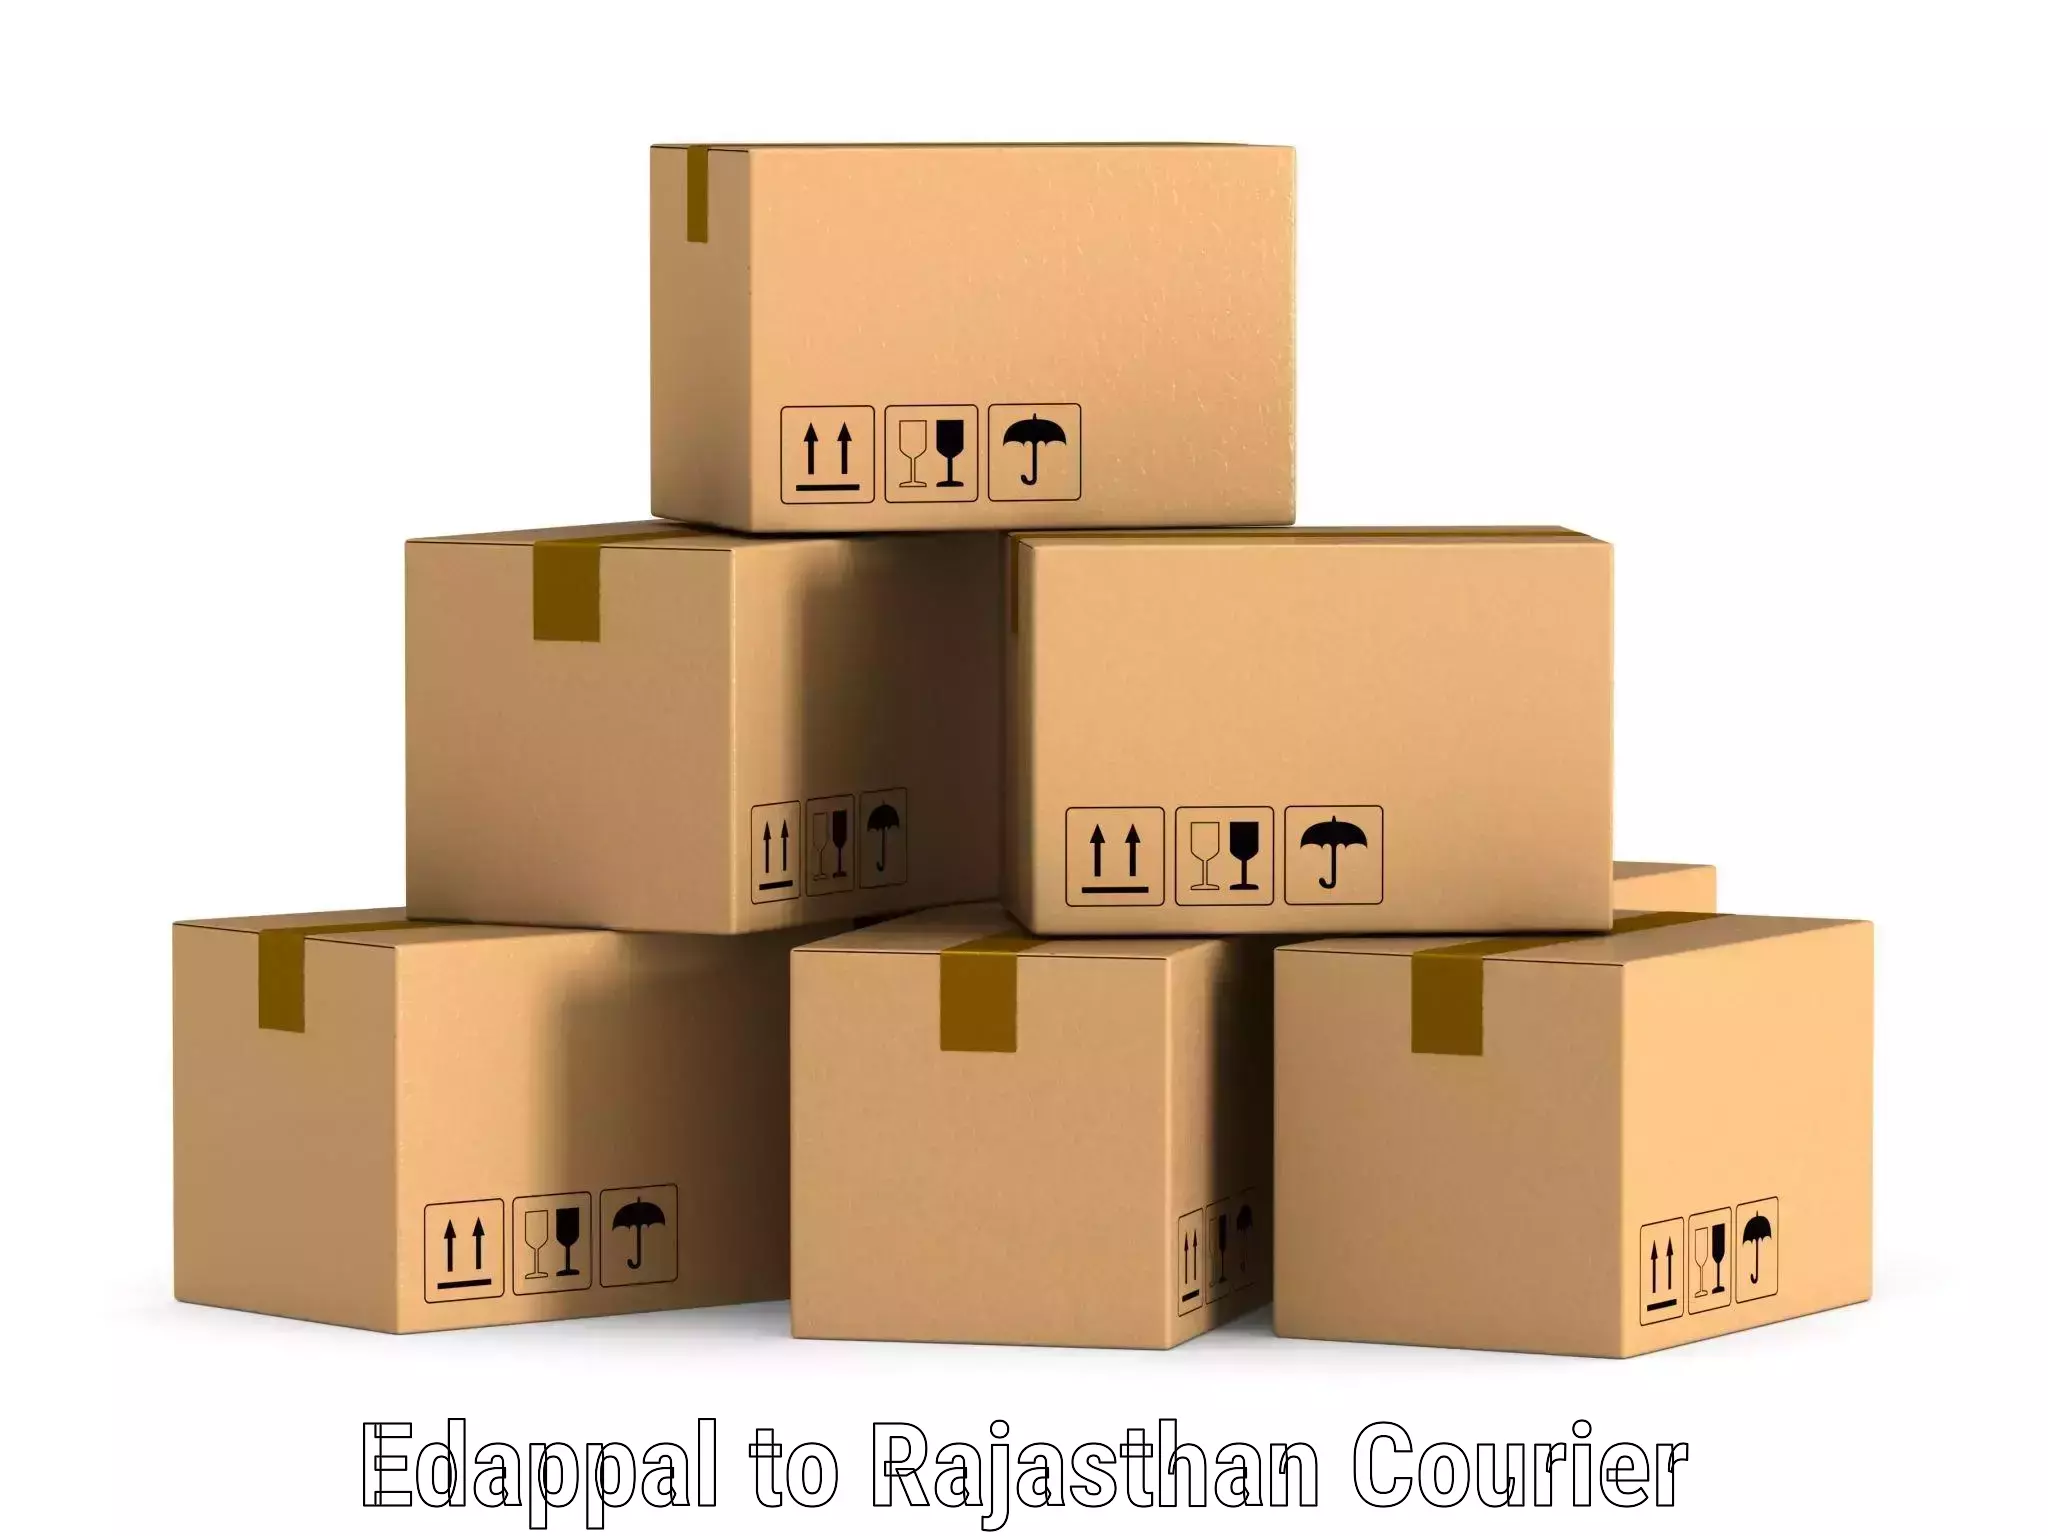 Innovative shipping solutions Edappal to Jaipur